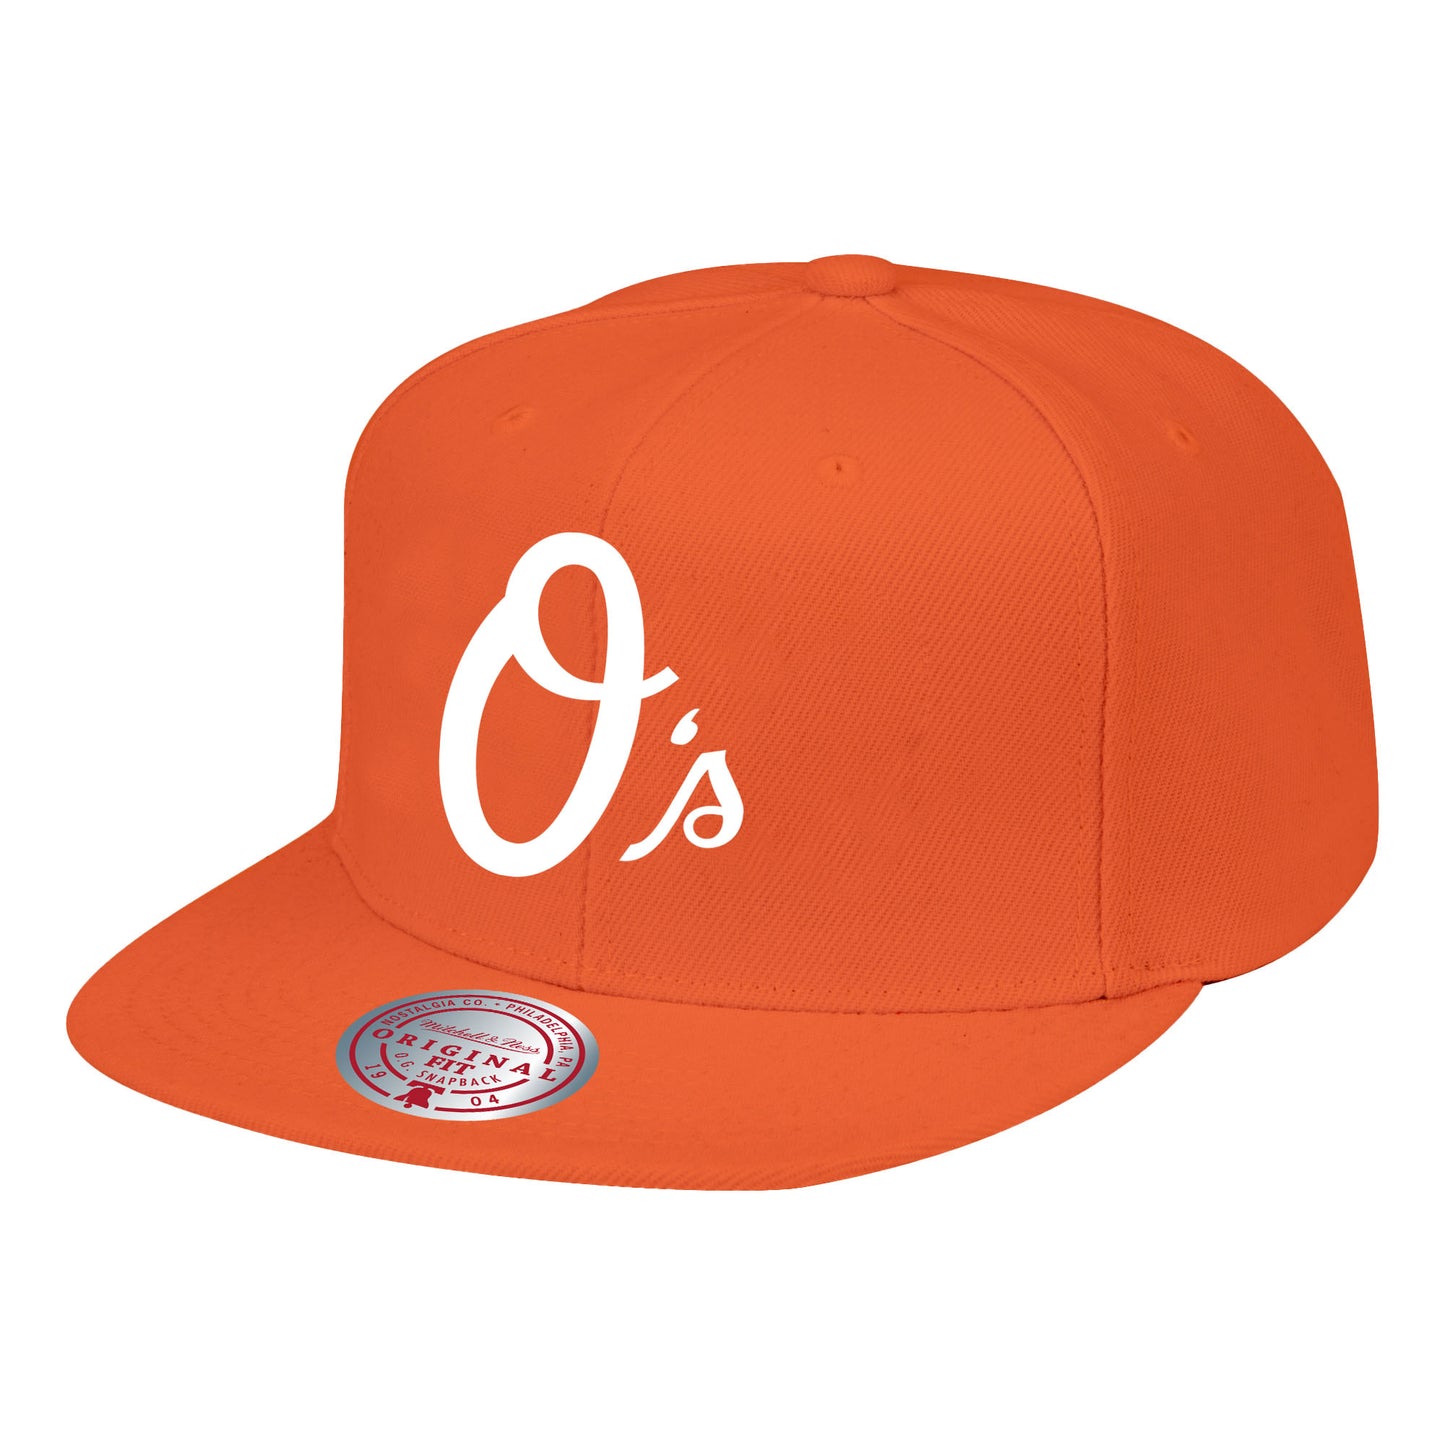 Baltimore Orioles Mitchell & Ness Back To Basics 60th Anniversary Snap Back Hat